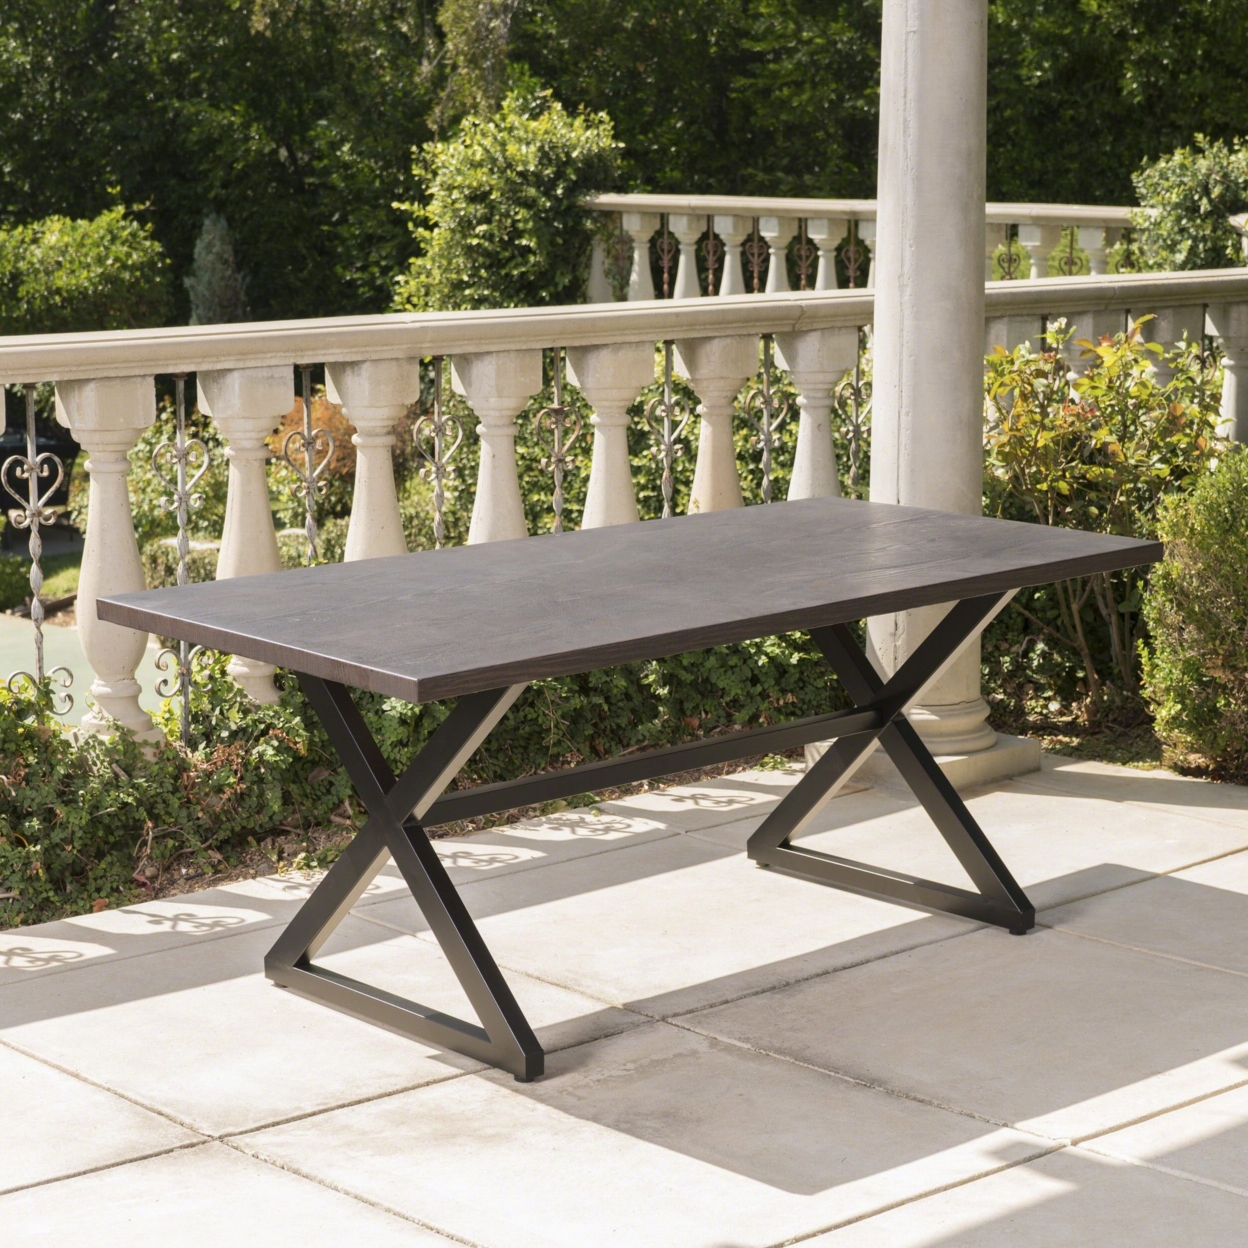 Rosarito Outdoor Aluminum Dining Table With Black Steel Frame - Gray